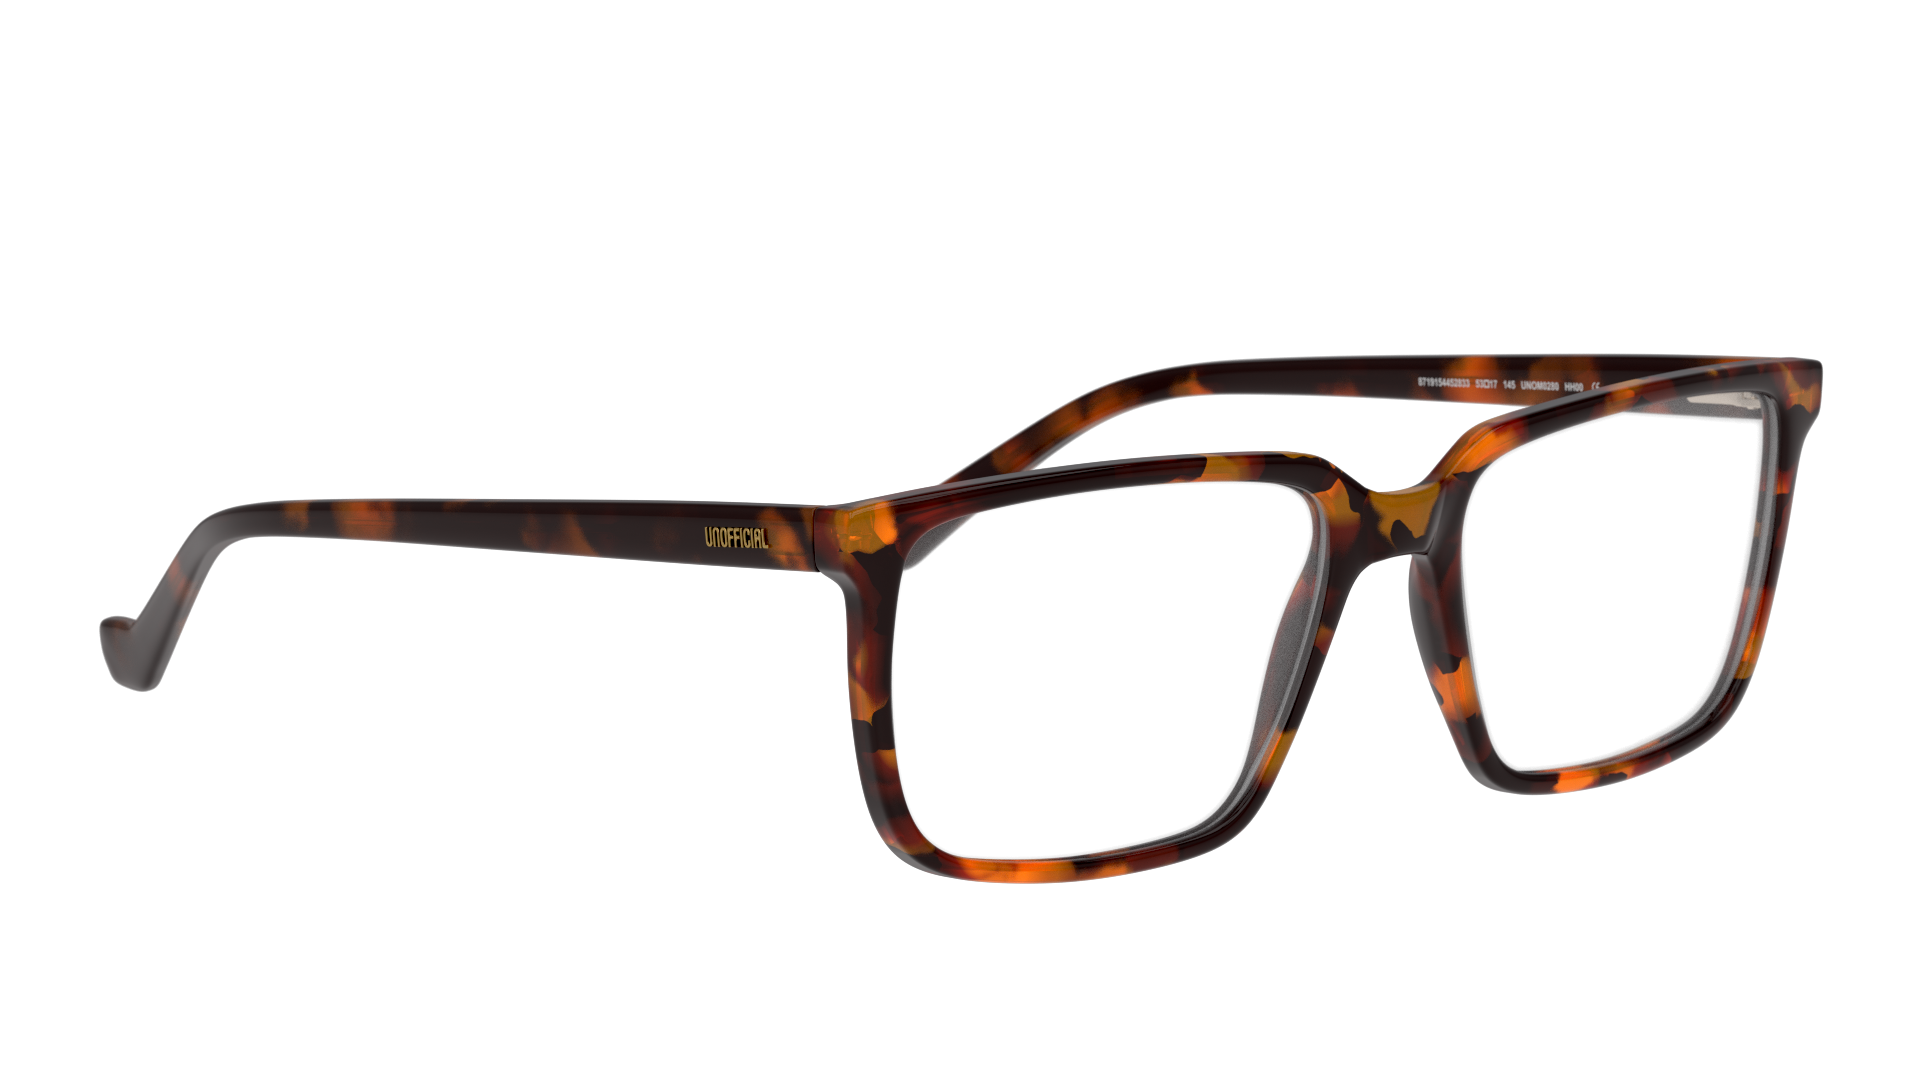 Angle_Right01 Unofficial UNOM0280 (HH00) Glasses Transparent / Havana